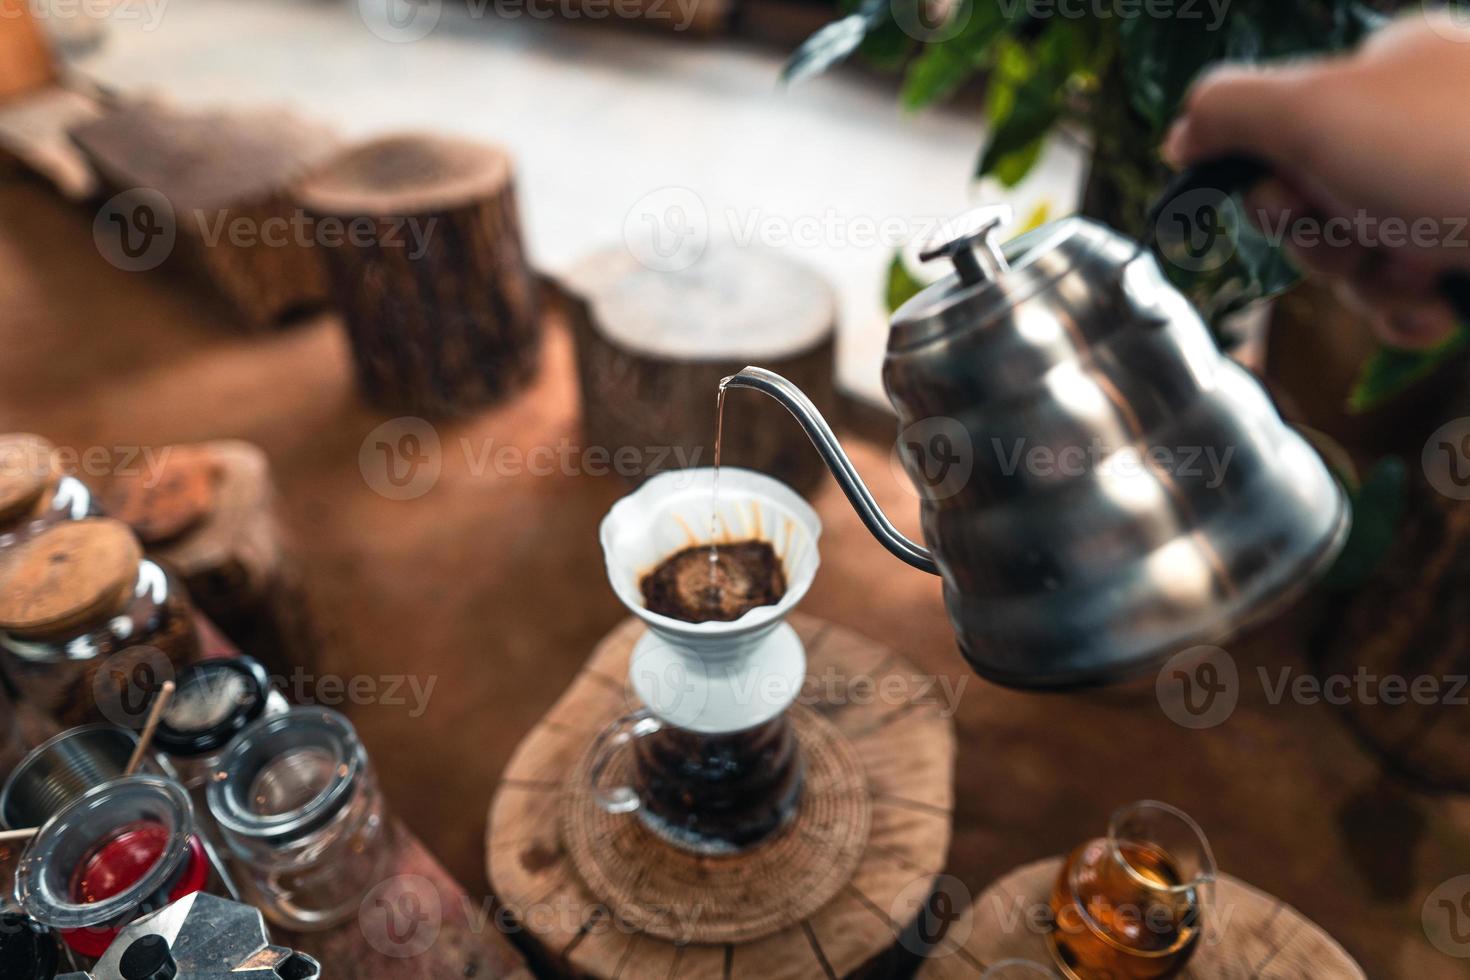 Pouring a hot water over a drip coffee photo